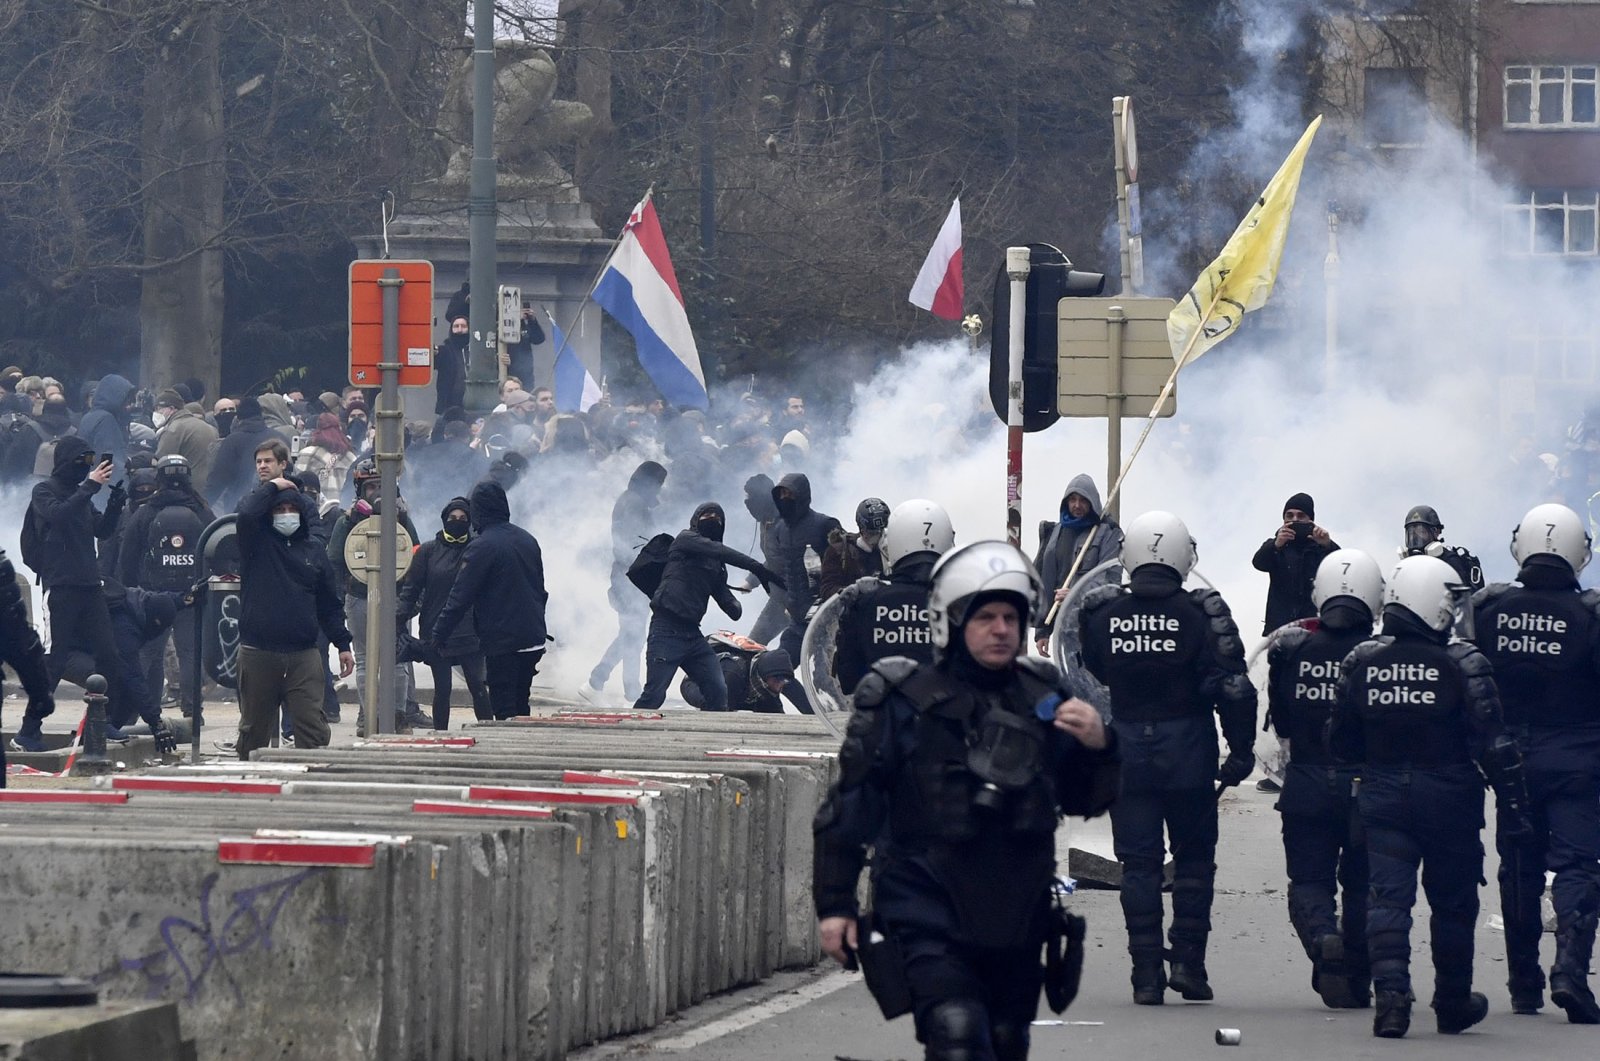 Police confront protestors during a demonstration against COVID-19 measures in Brussels, Belgium, Jan. 23, 2022. (AP Photo)